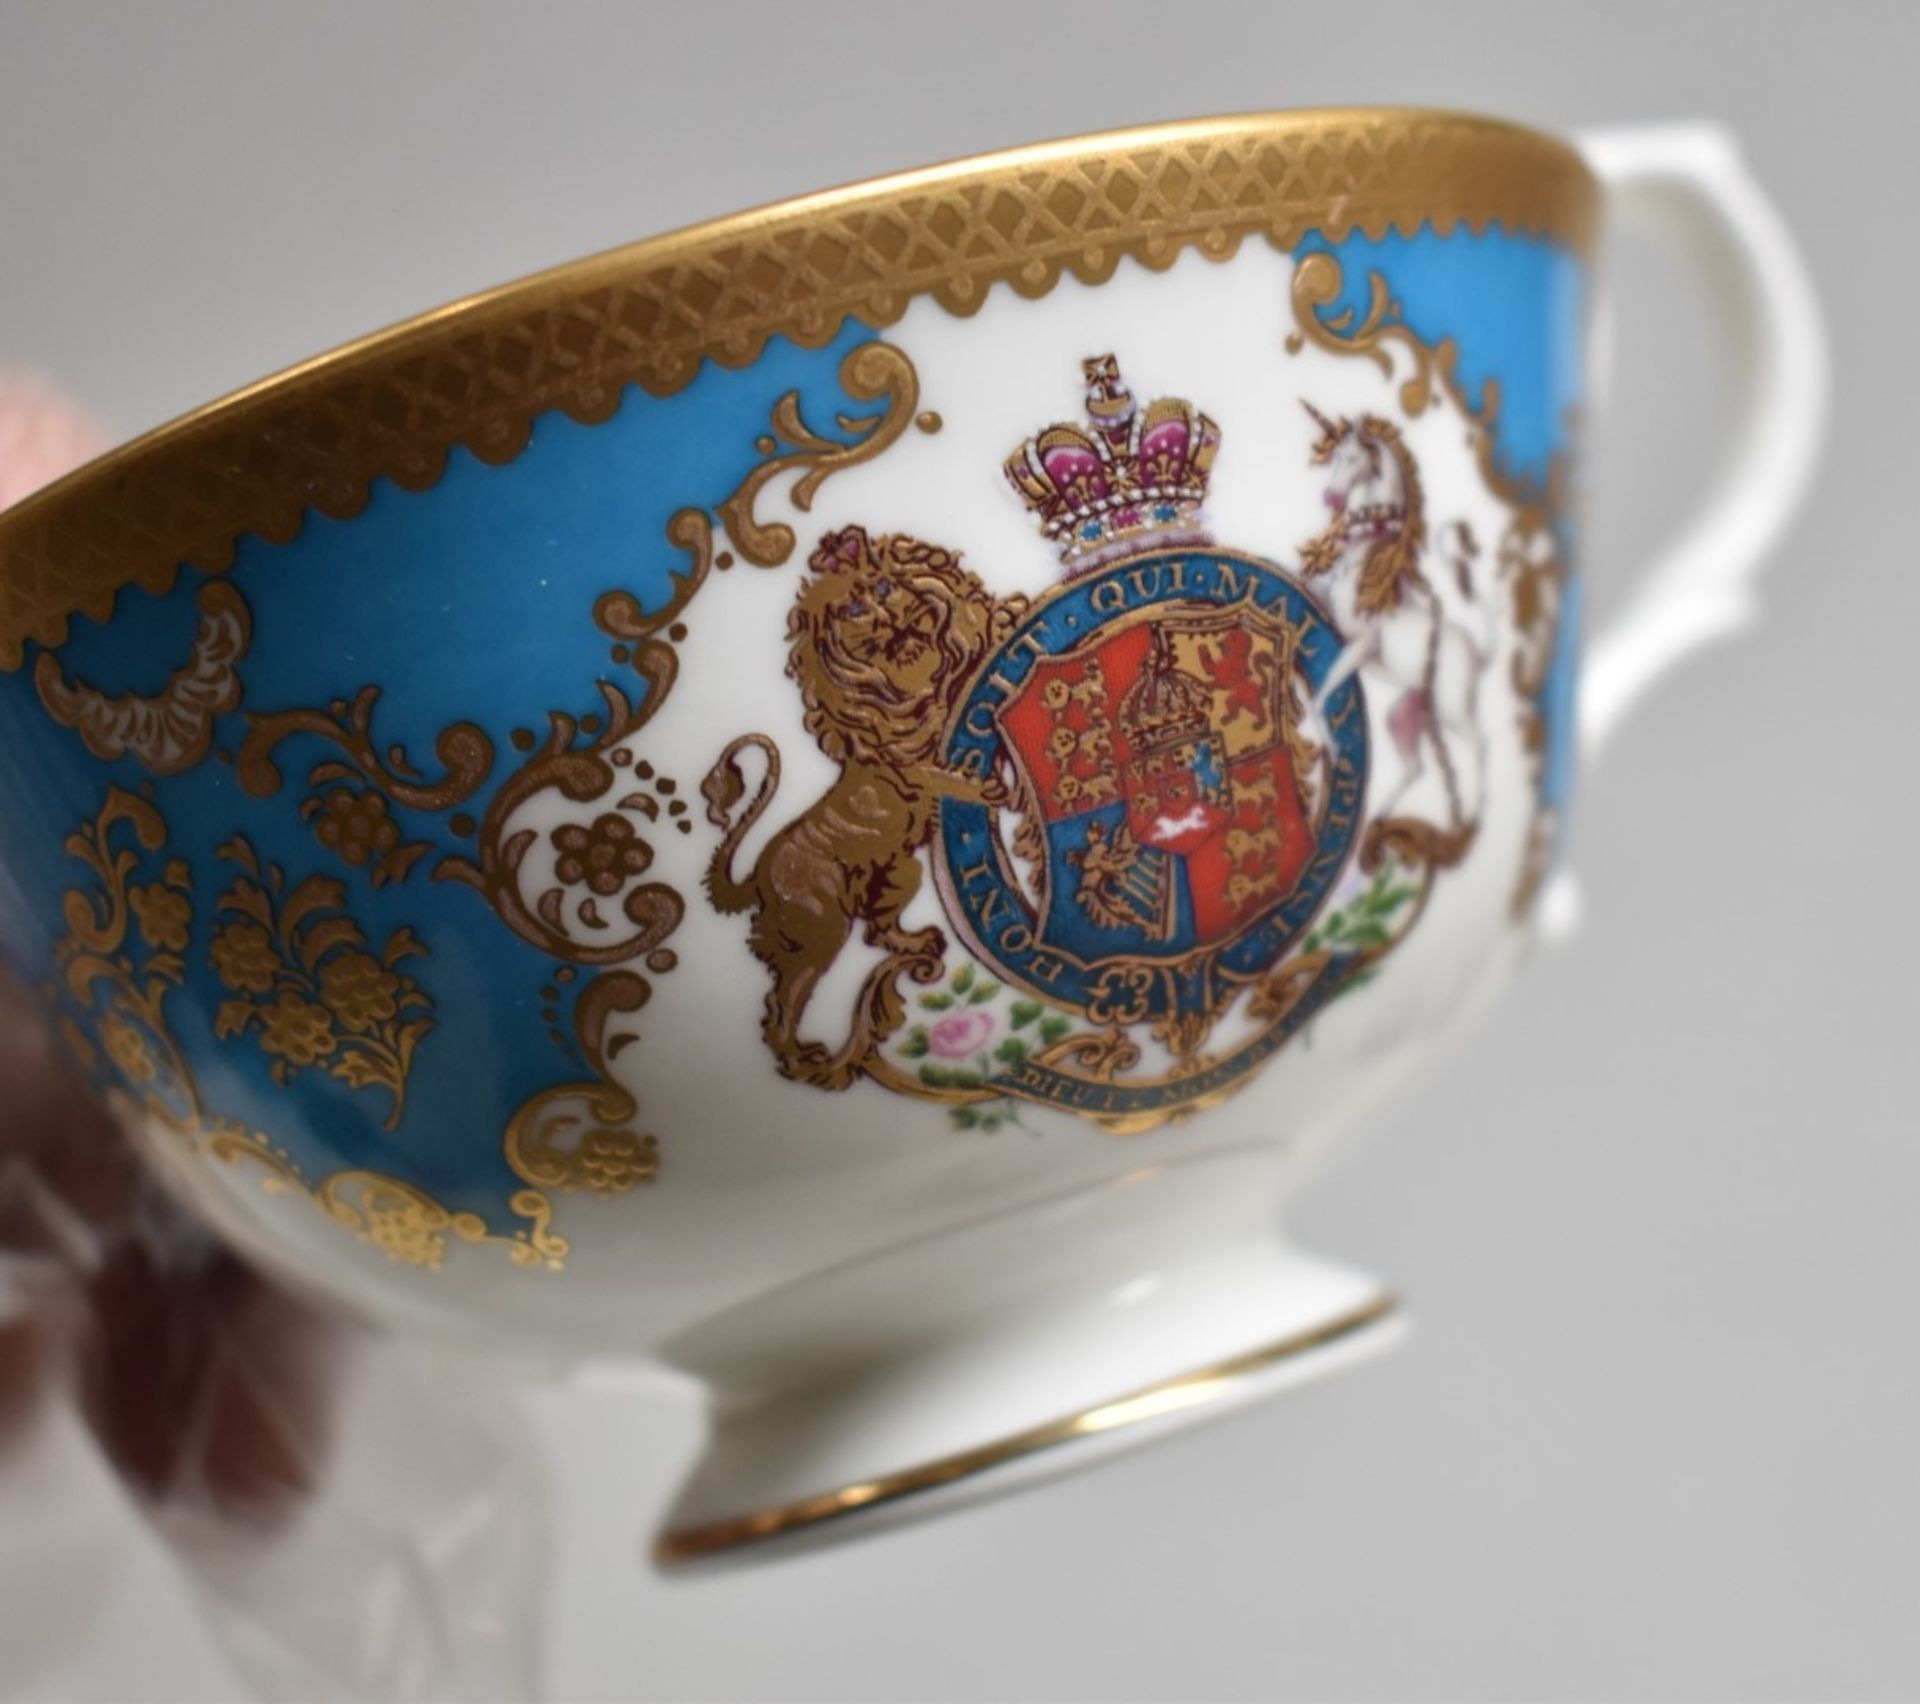 1 x ROYAL COLLECTION TRUST 'Coat of Arms' Fine Bone China Teacup and Saucer Set, Hand finished - Image 3 of 9